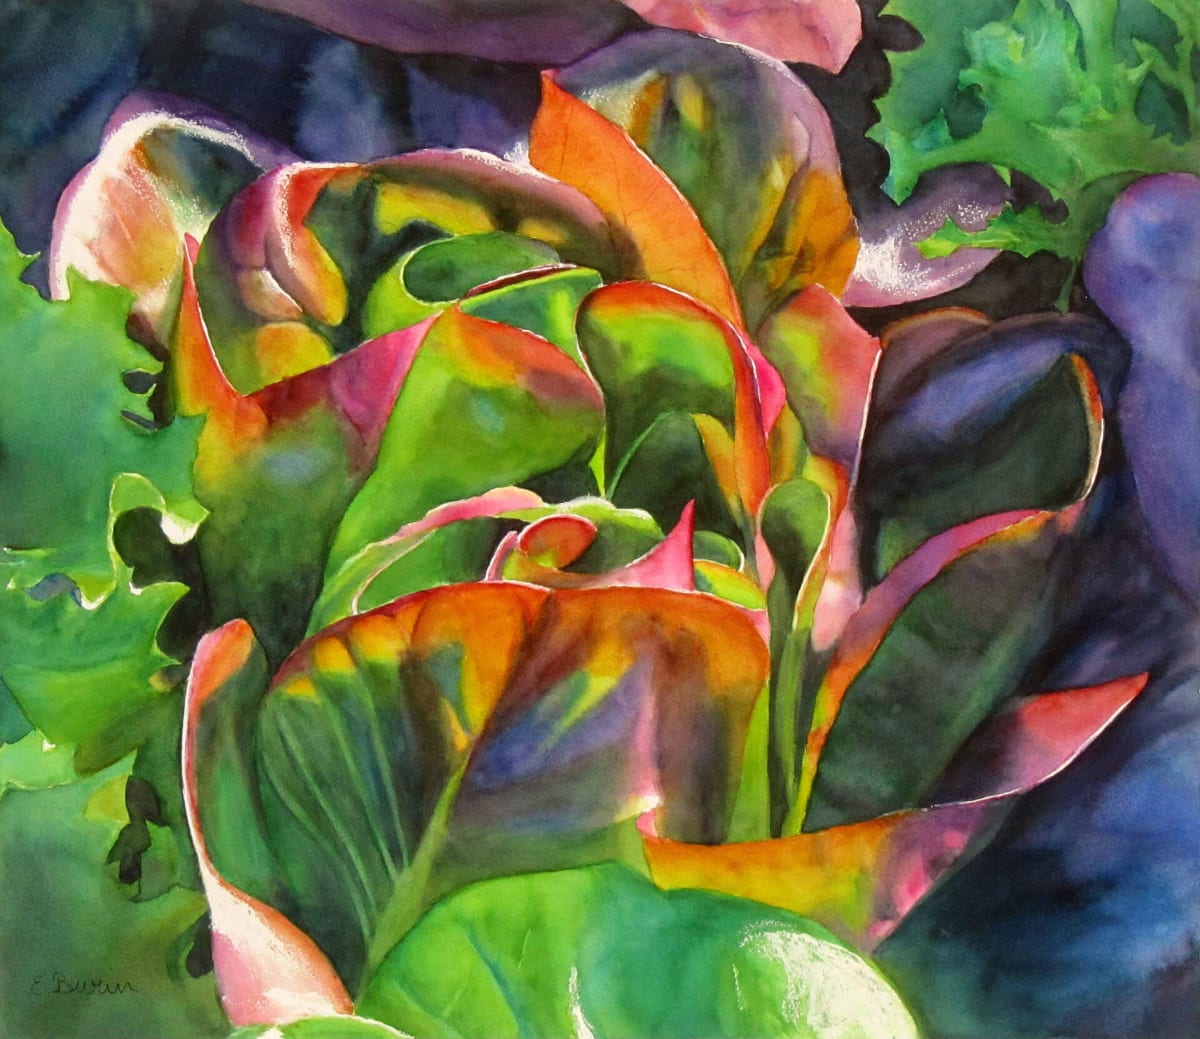 Red Lettuce by Elizabeth Burin  Image: Watercolor painting of red lettuce in sunlight